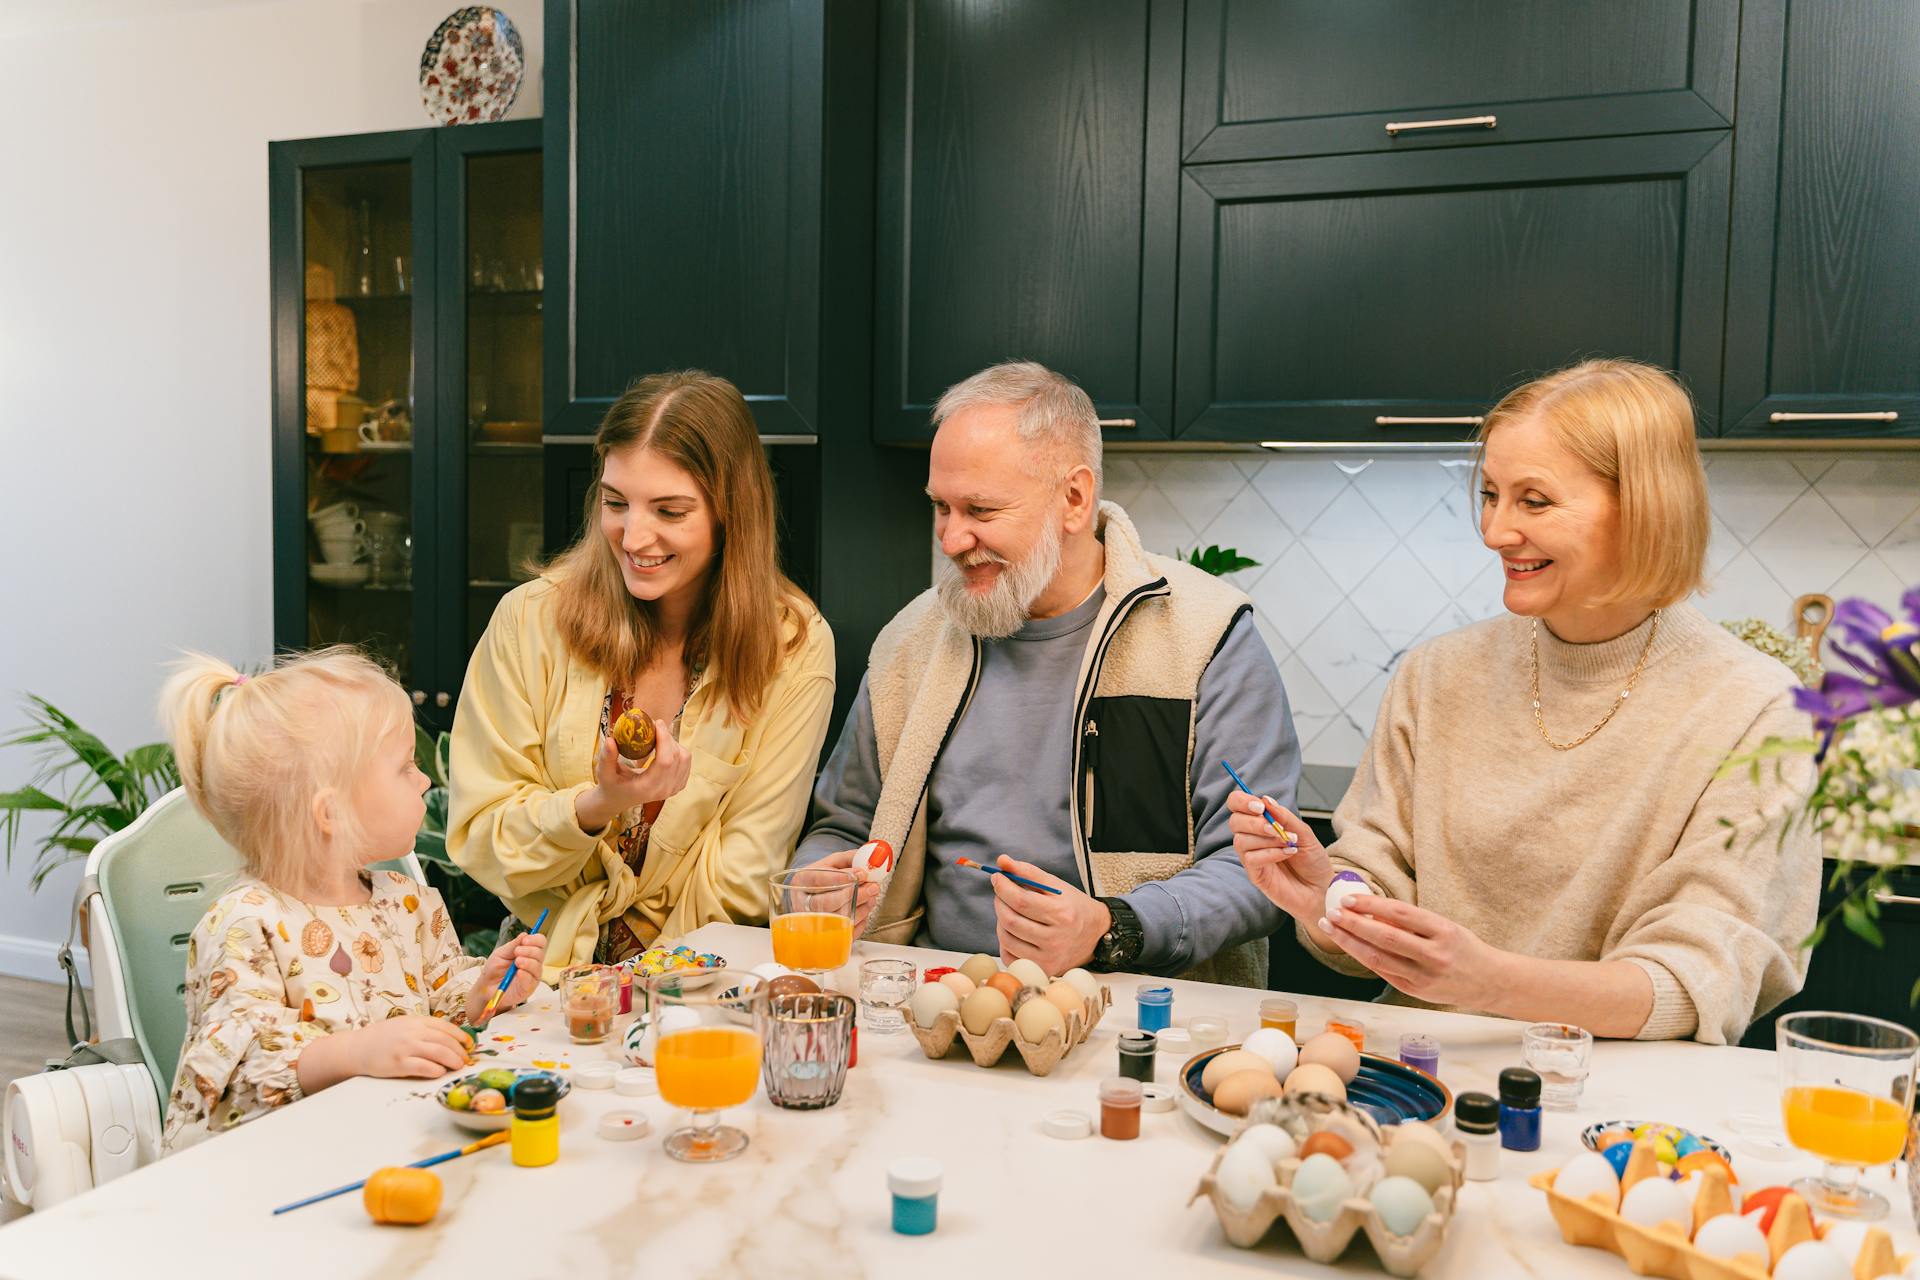 A family painting eggs for easter | Source: Pexels